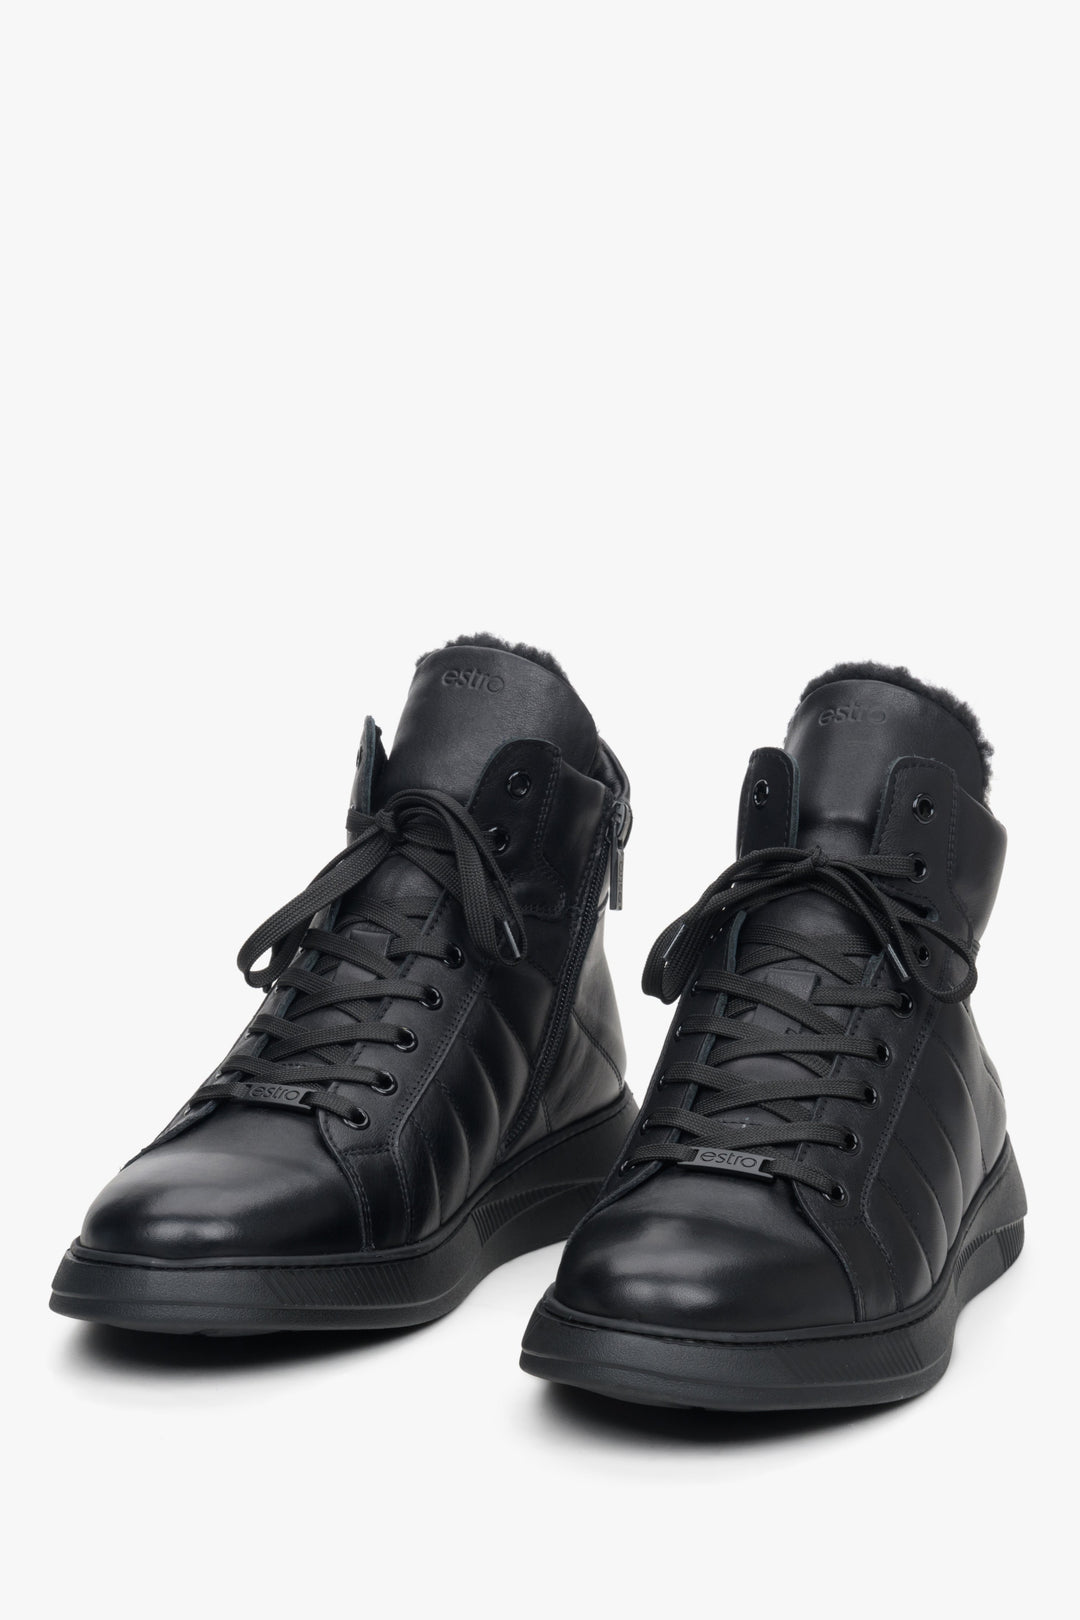 Men's black leather sneakers with fur lining by Estro - close-up on the toe of the shoe.